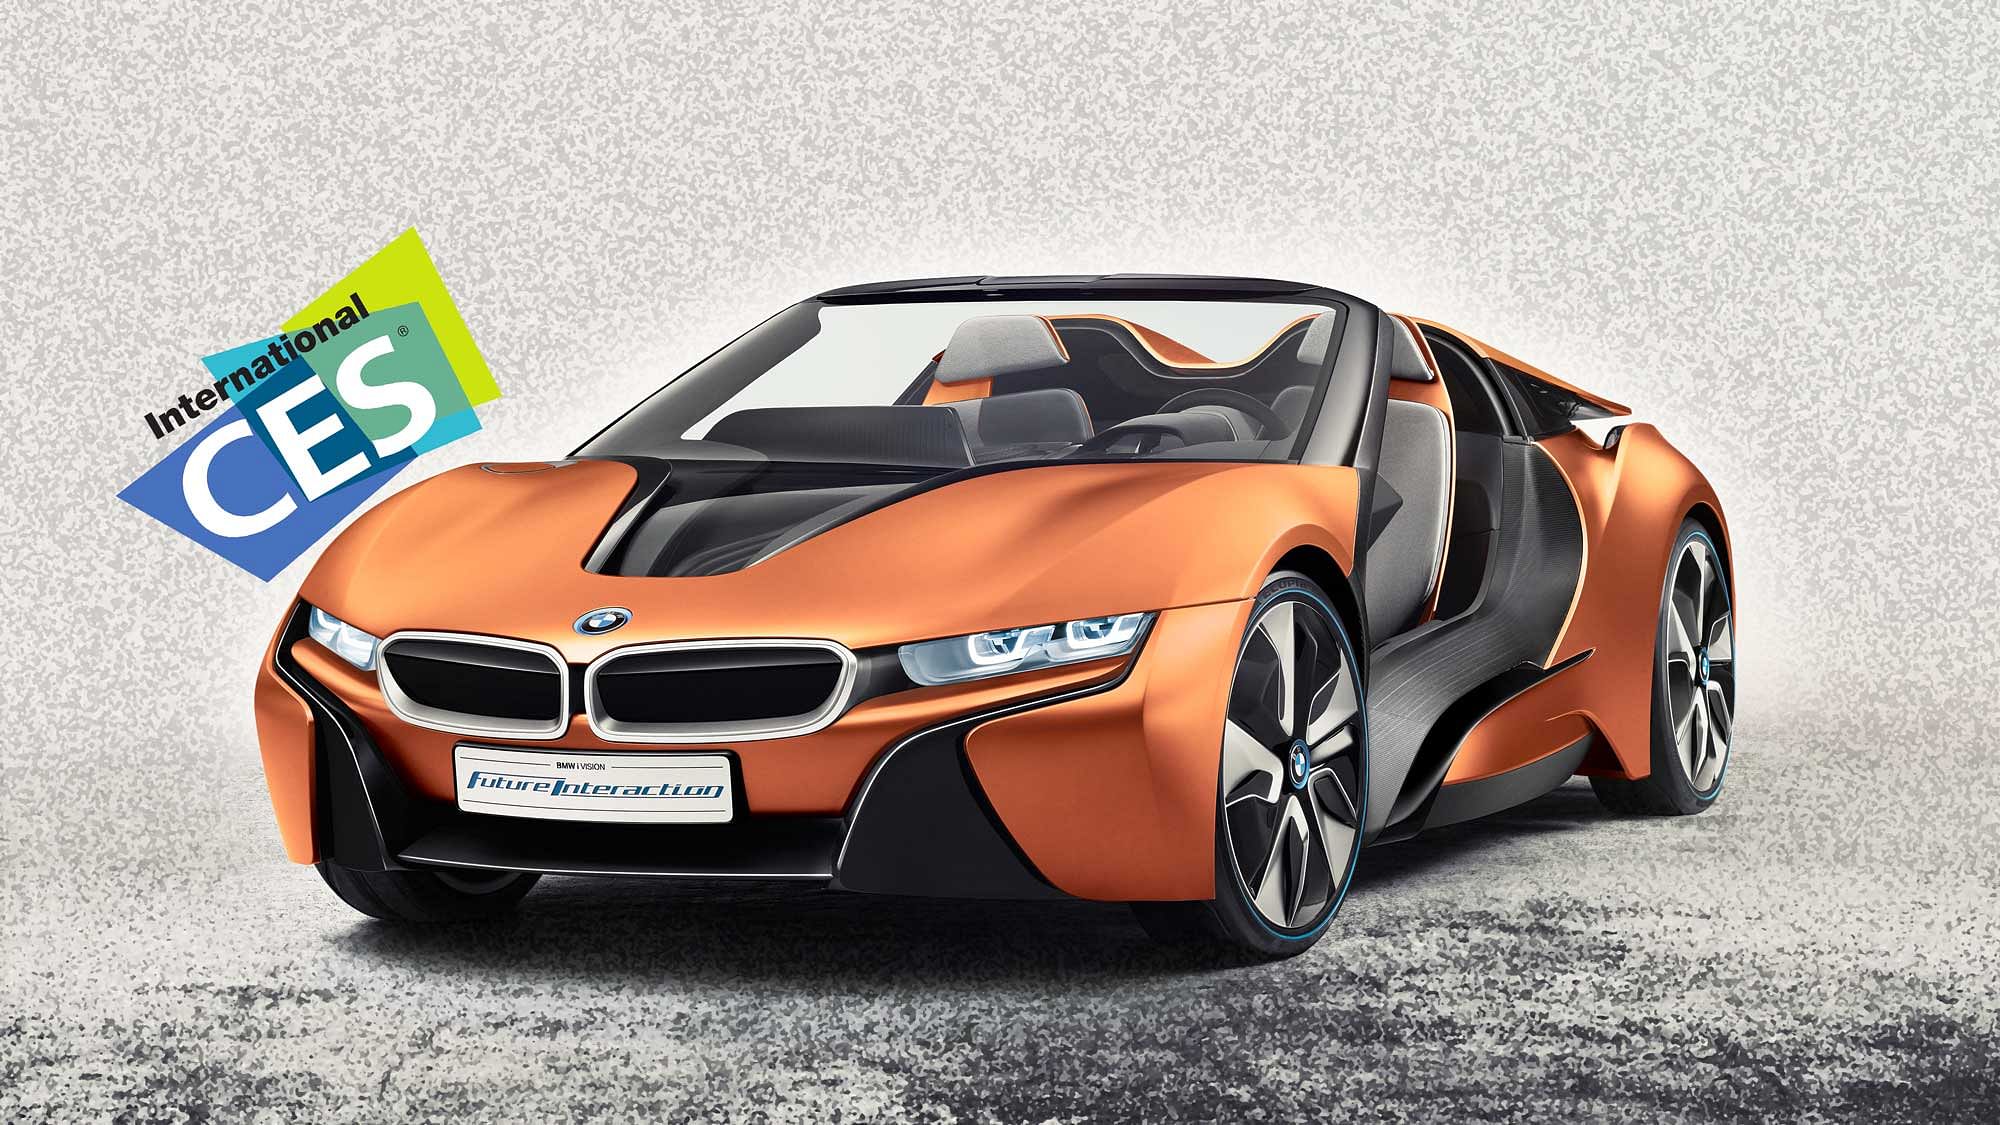 BMW iVision Future Interaction. (Photo: BMW)